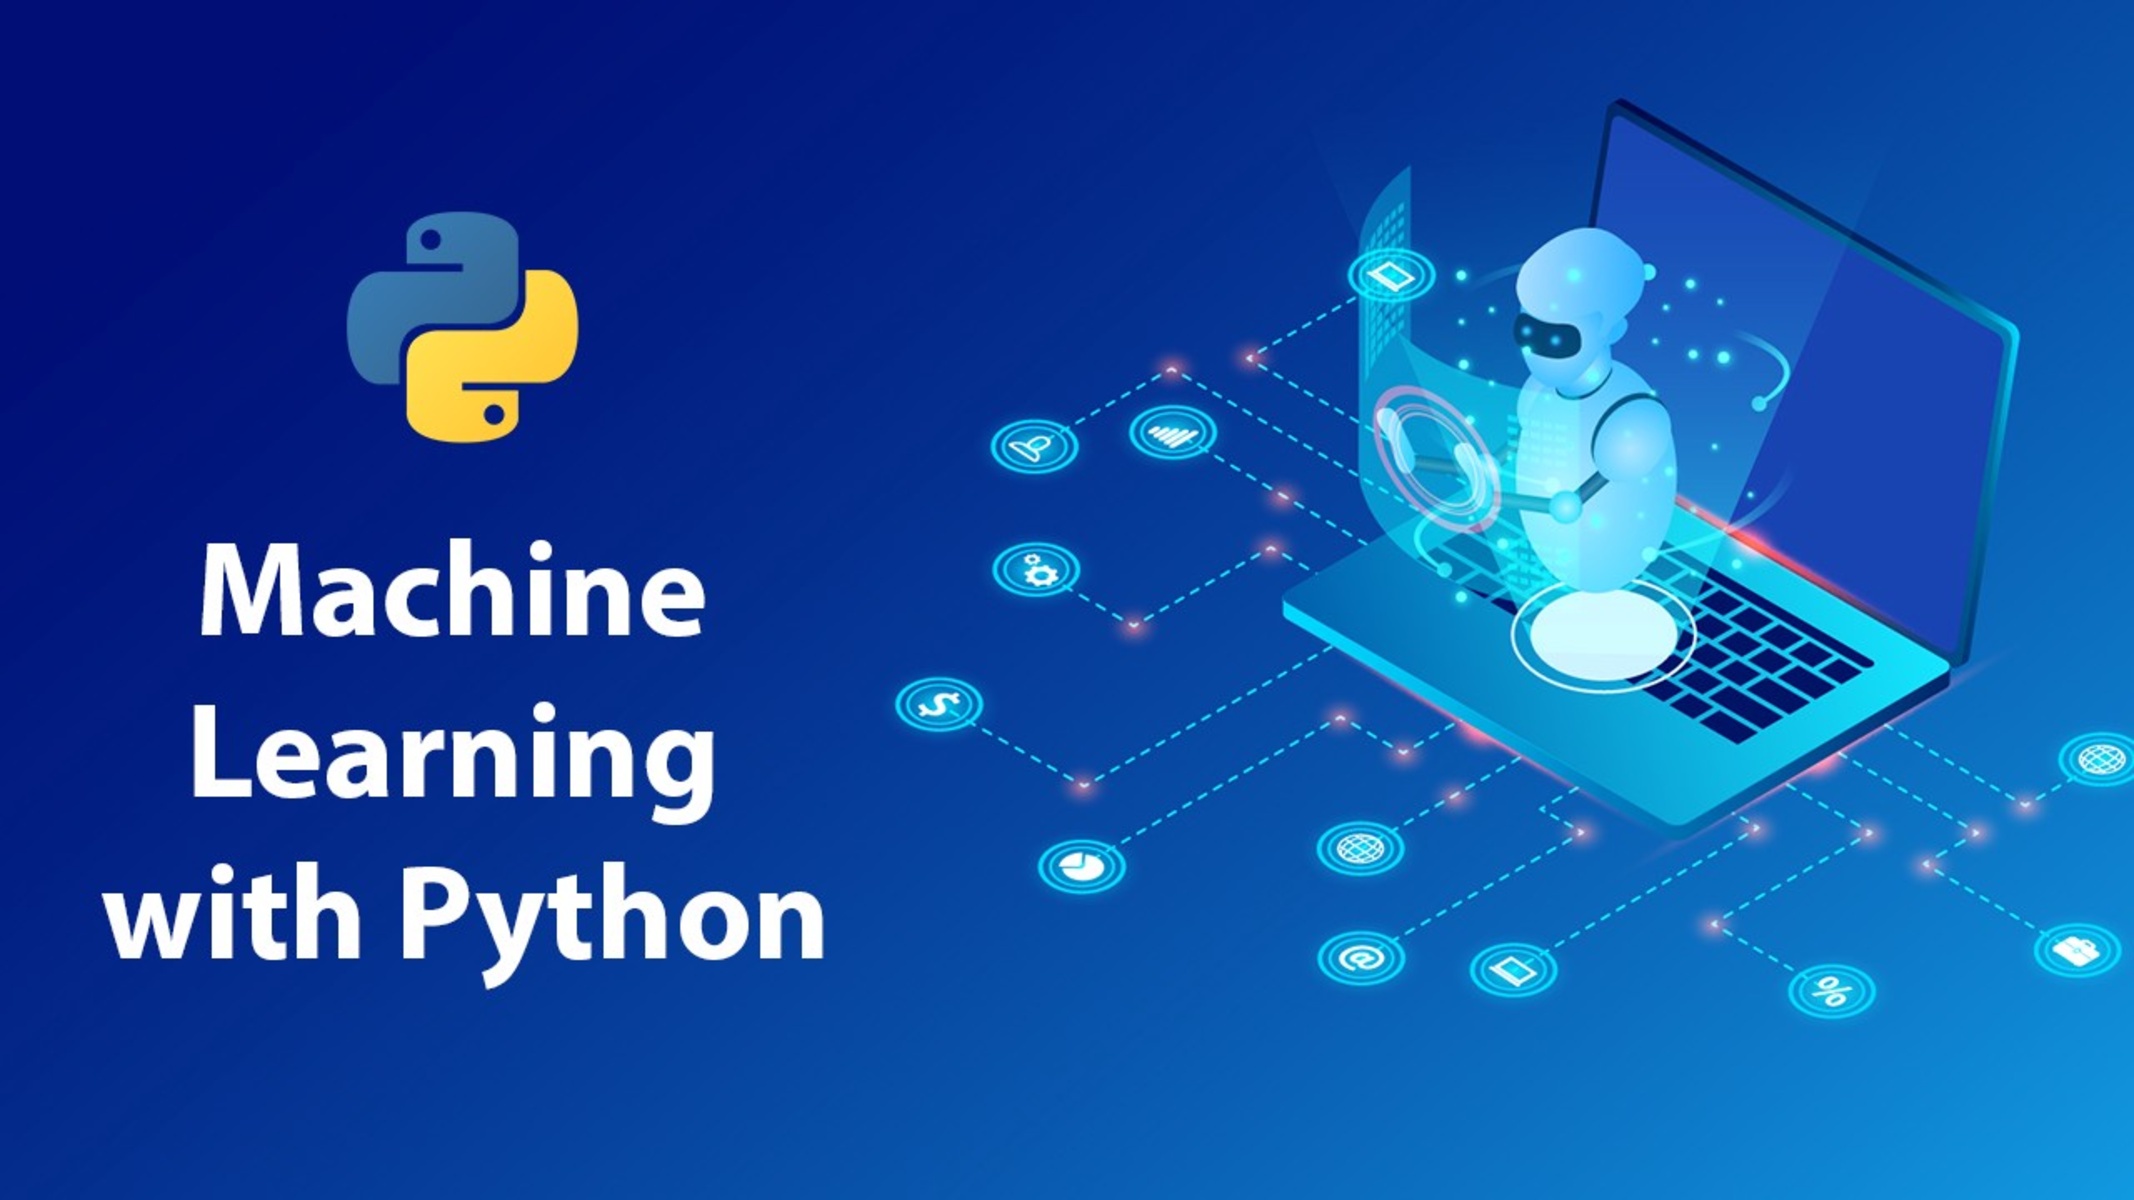 Why Use Python For Machine Learning